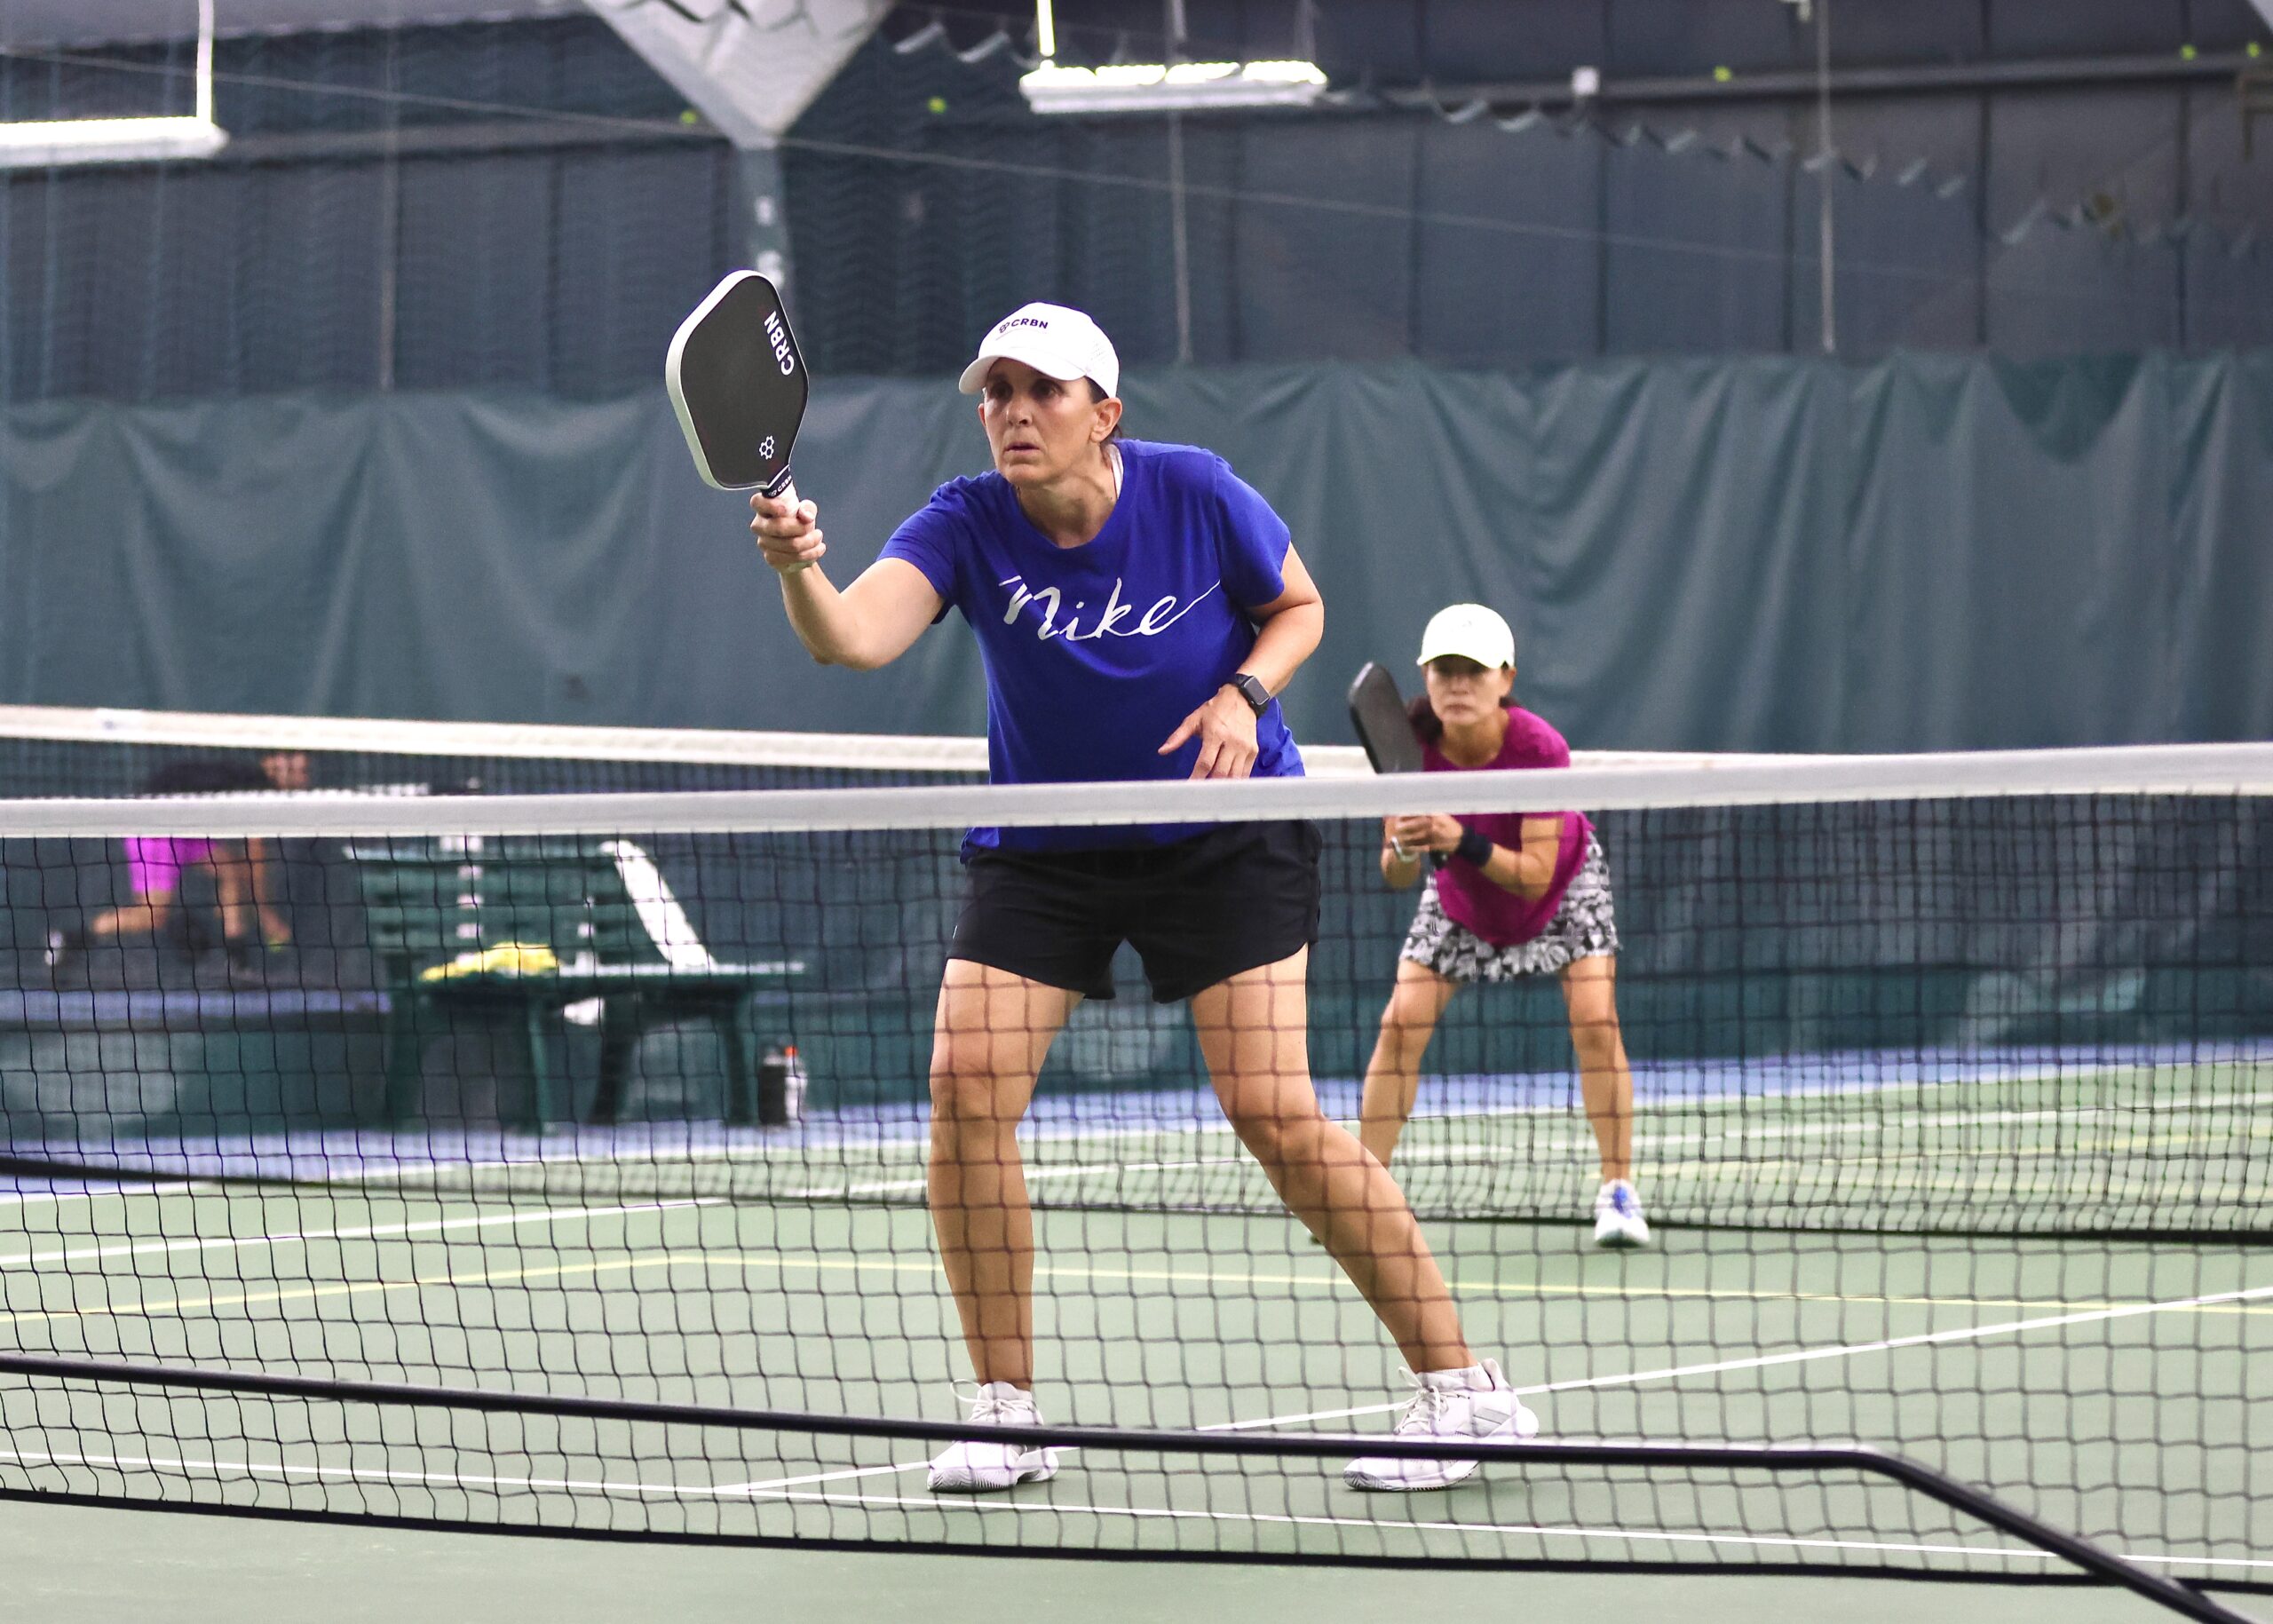 A woman in a blue shirt prepares to hit the ball